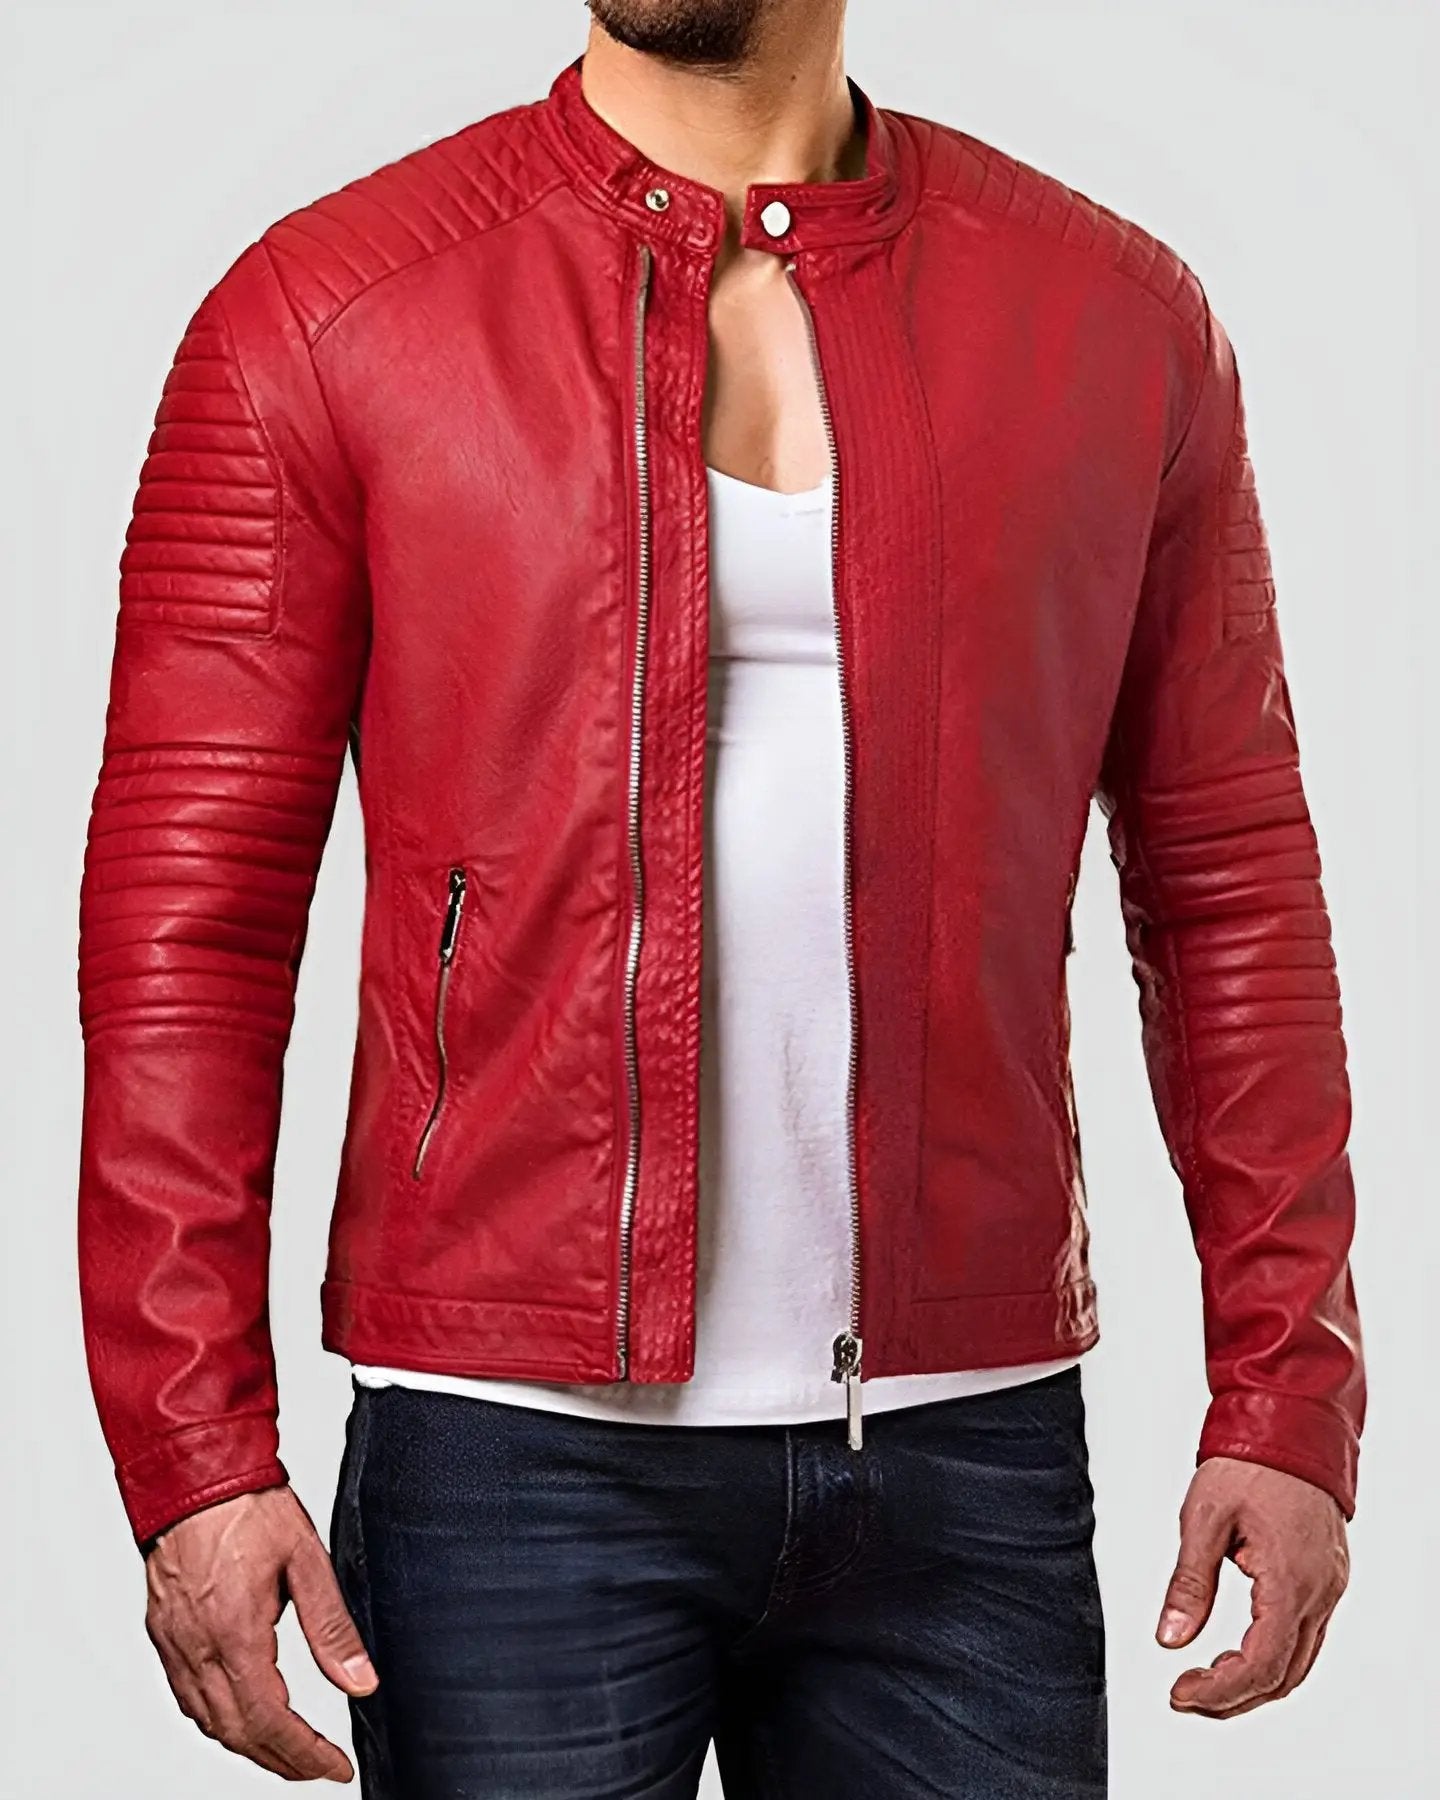 Buy Men Red Solid Casual Tailored Motorcycle Biker Leather Jacket, Men Red  Leather Jacket, Men Red Biker Jacket, Men Red Jacket Online in India - Etsy